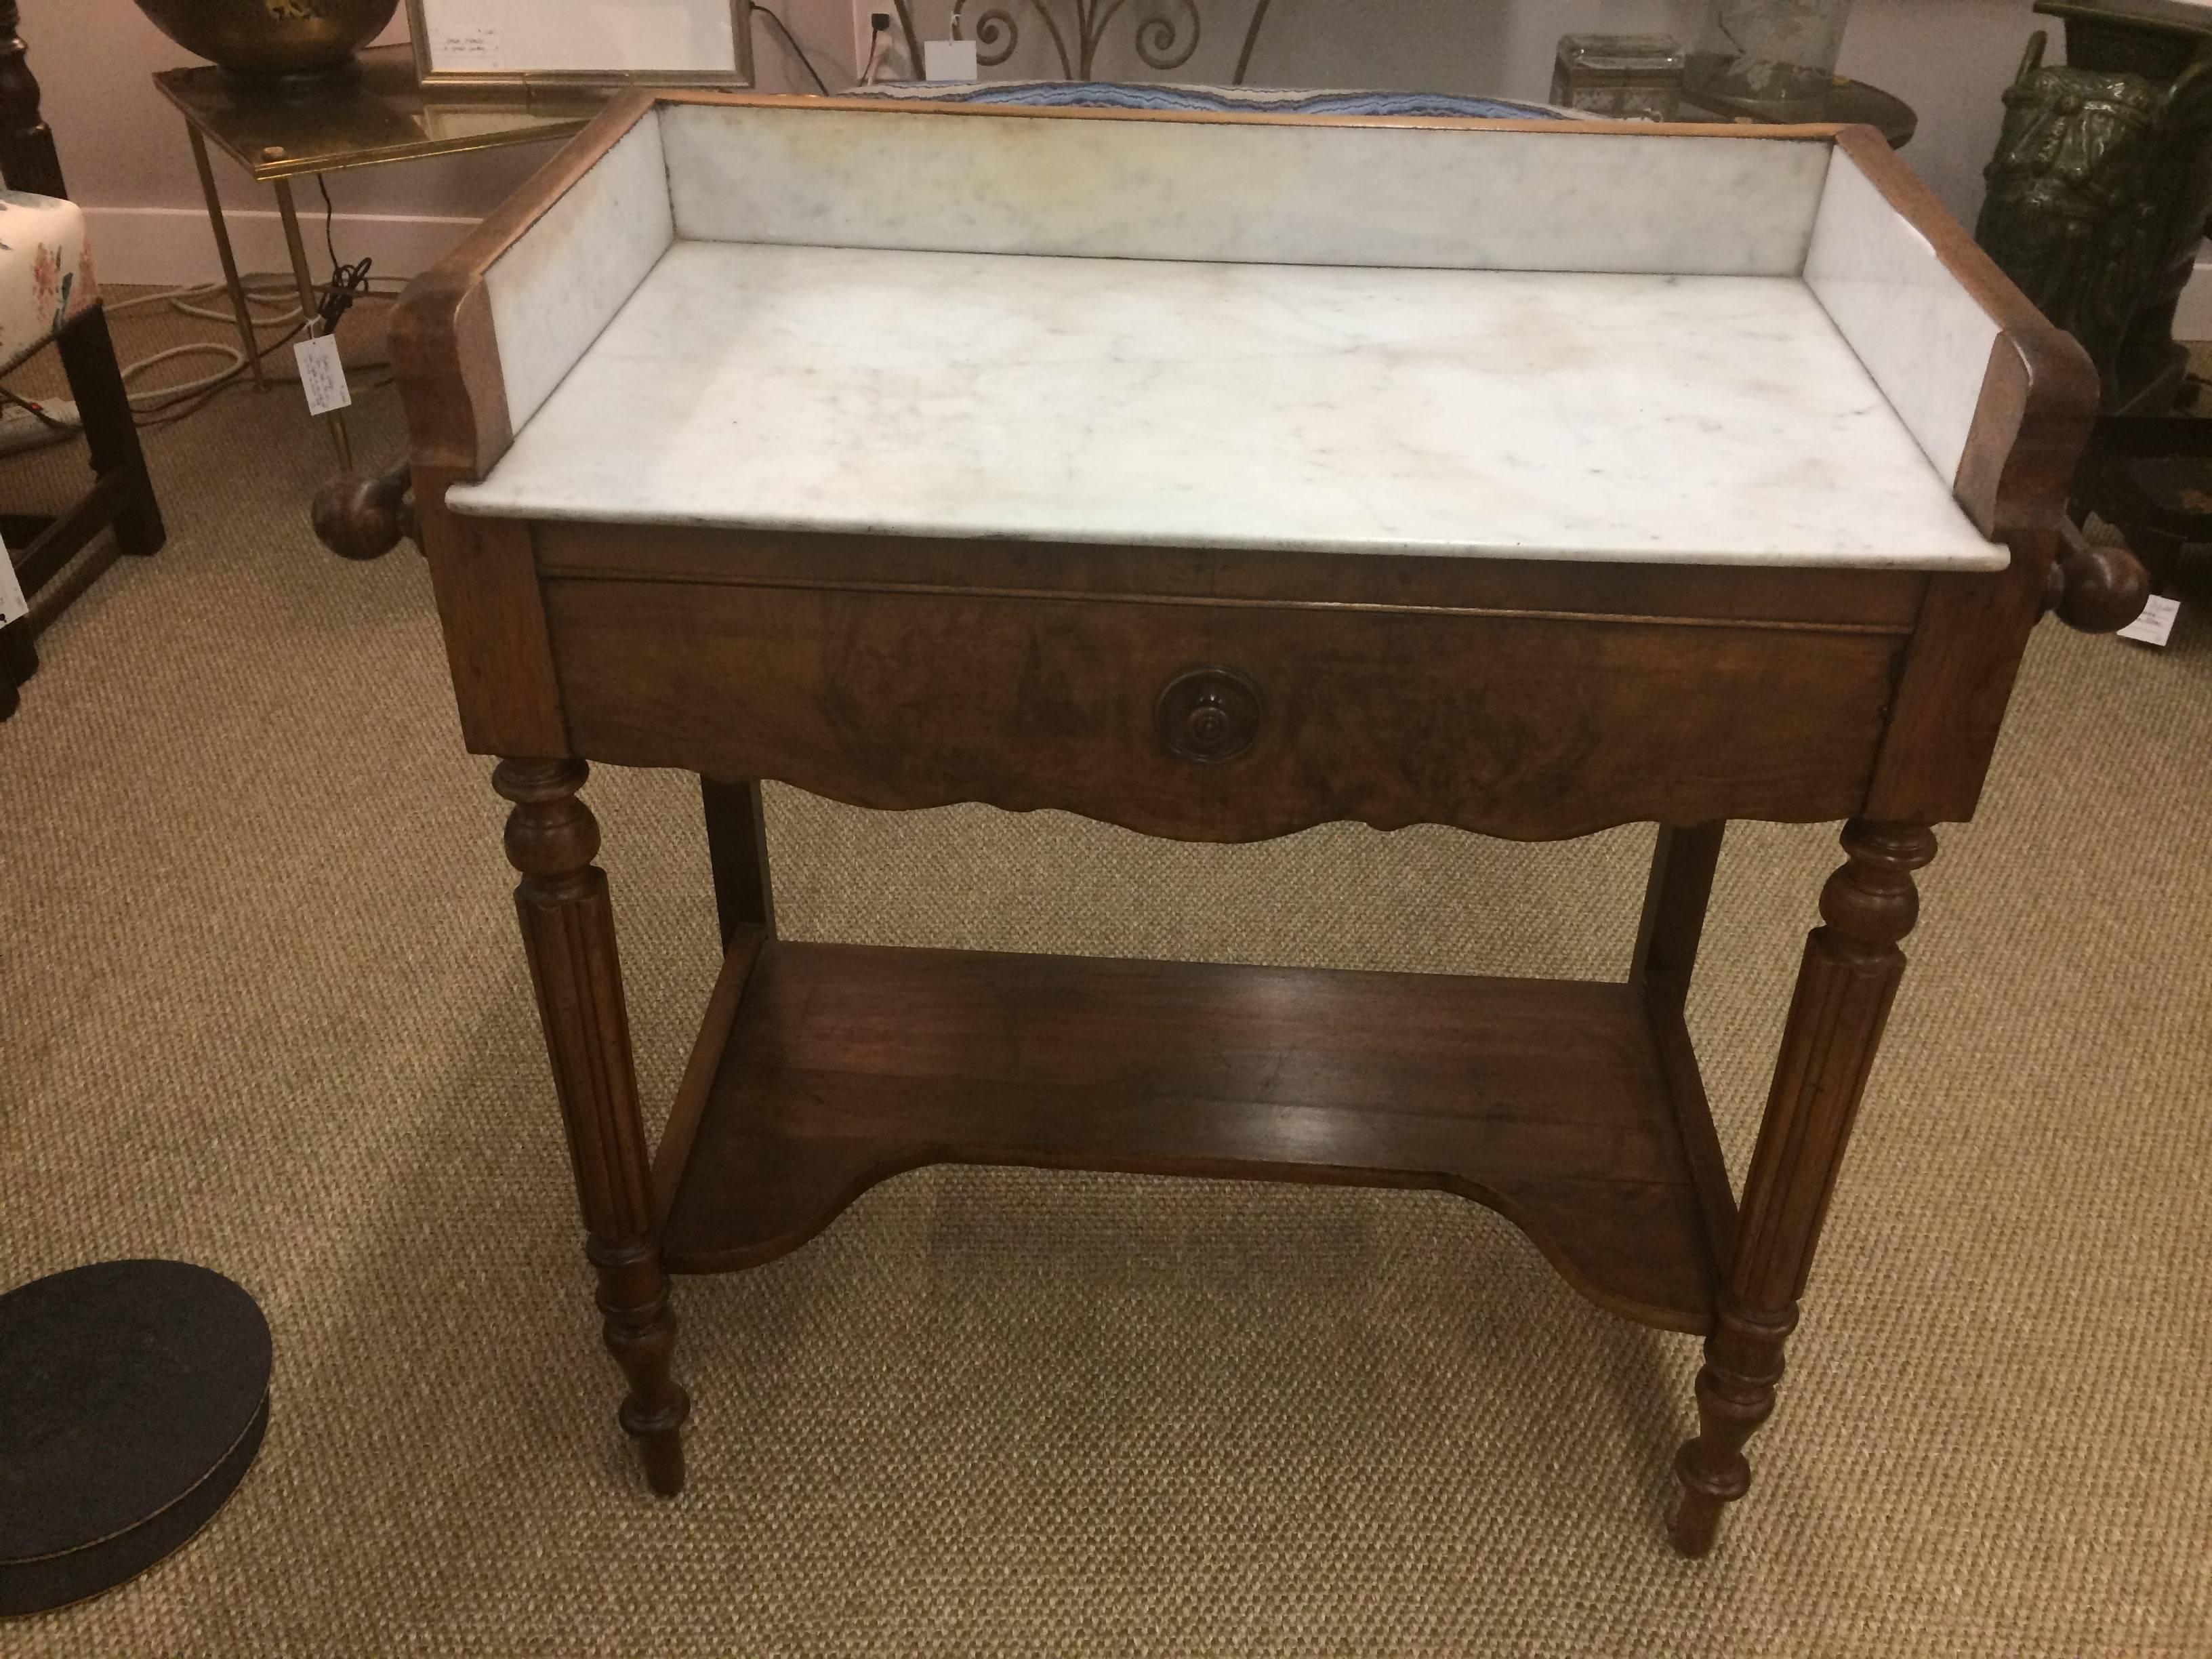 A wonderful rare find originally meant to be a kitchen mixing table, versatile for it's marble gallery, single drawer, and towel racks on either side. Gorgeous grained mahogany and pretty belly button of a pull on the drawer.